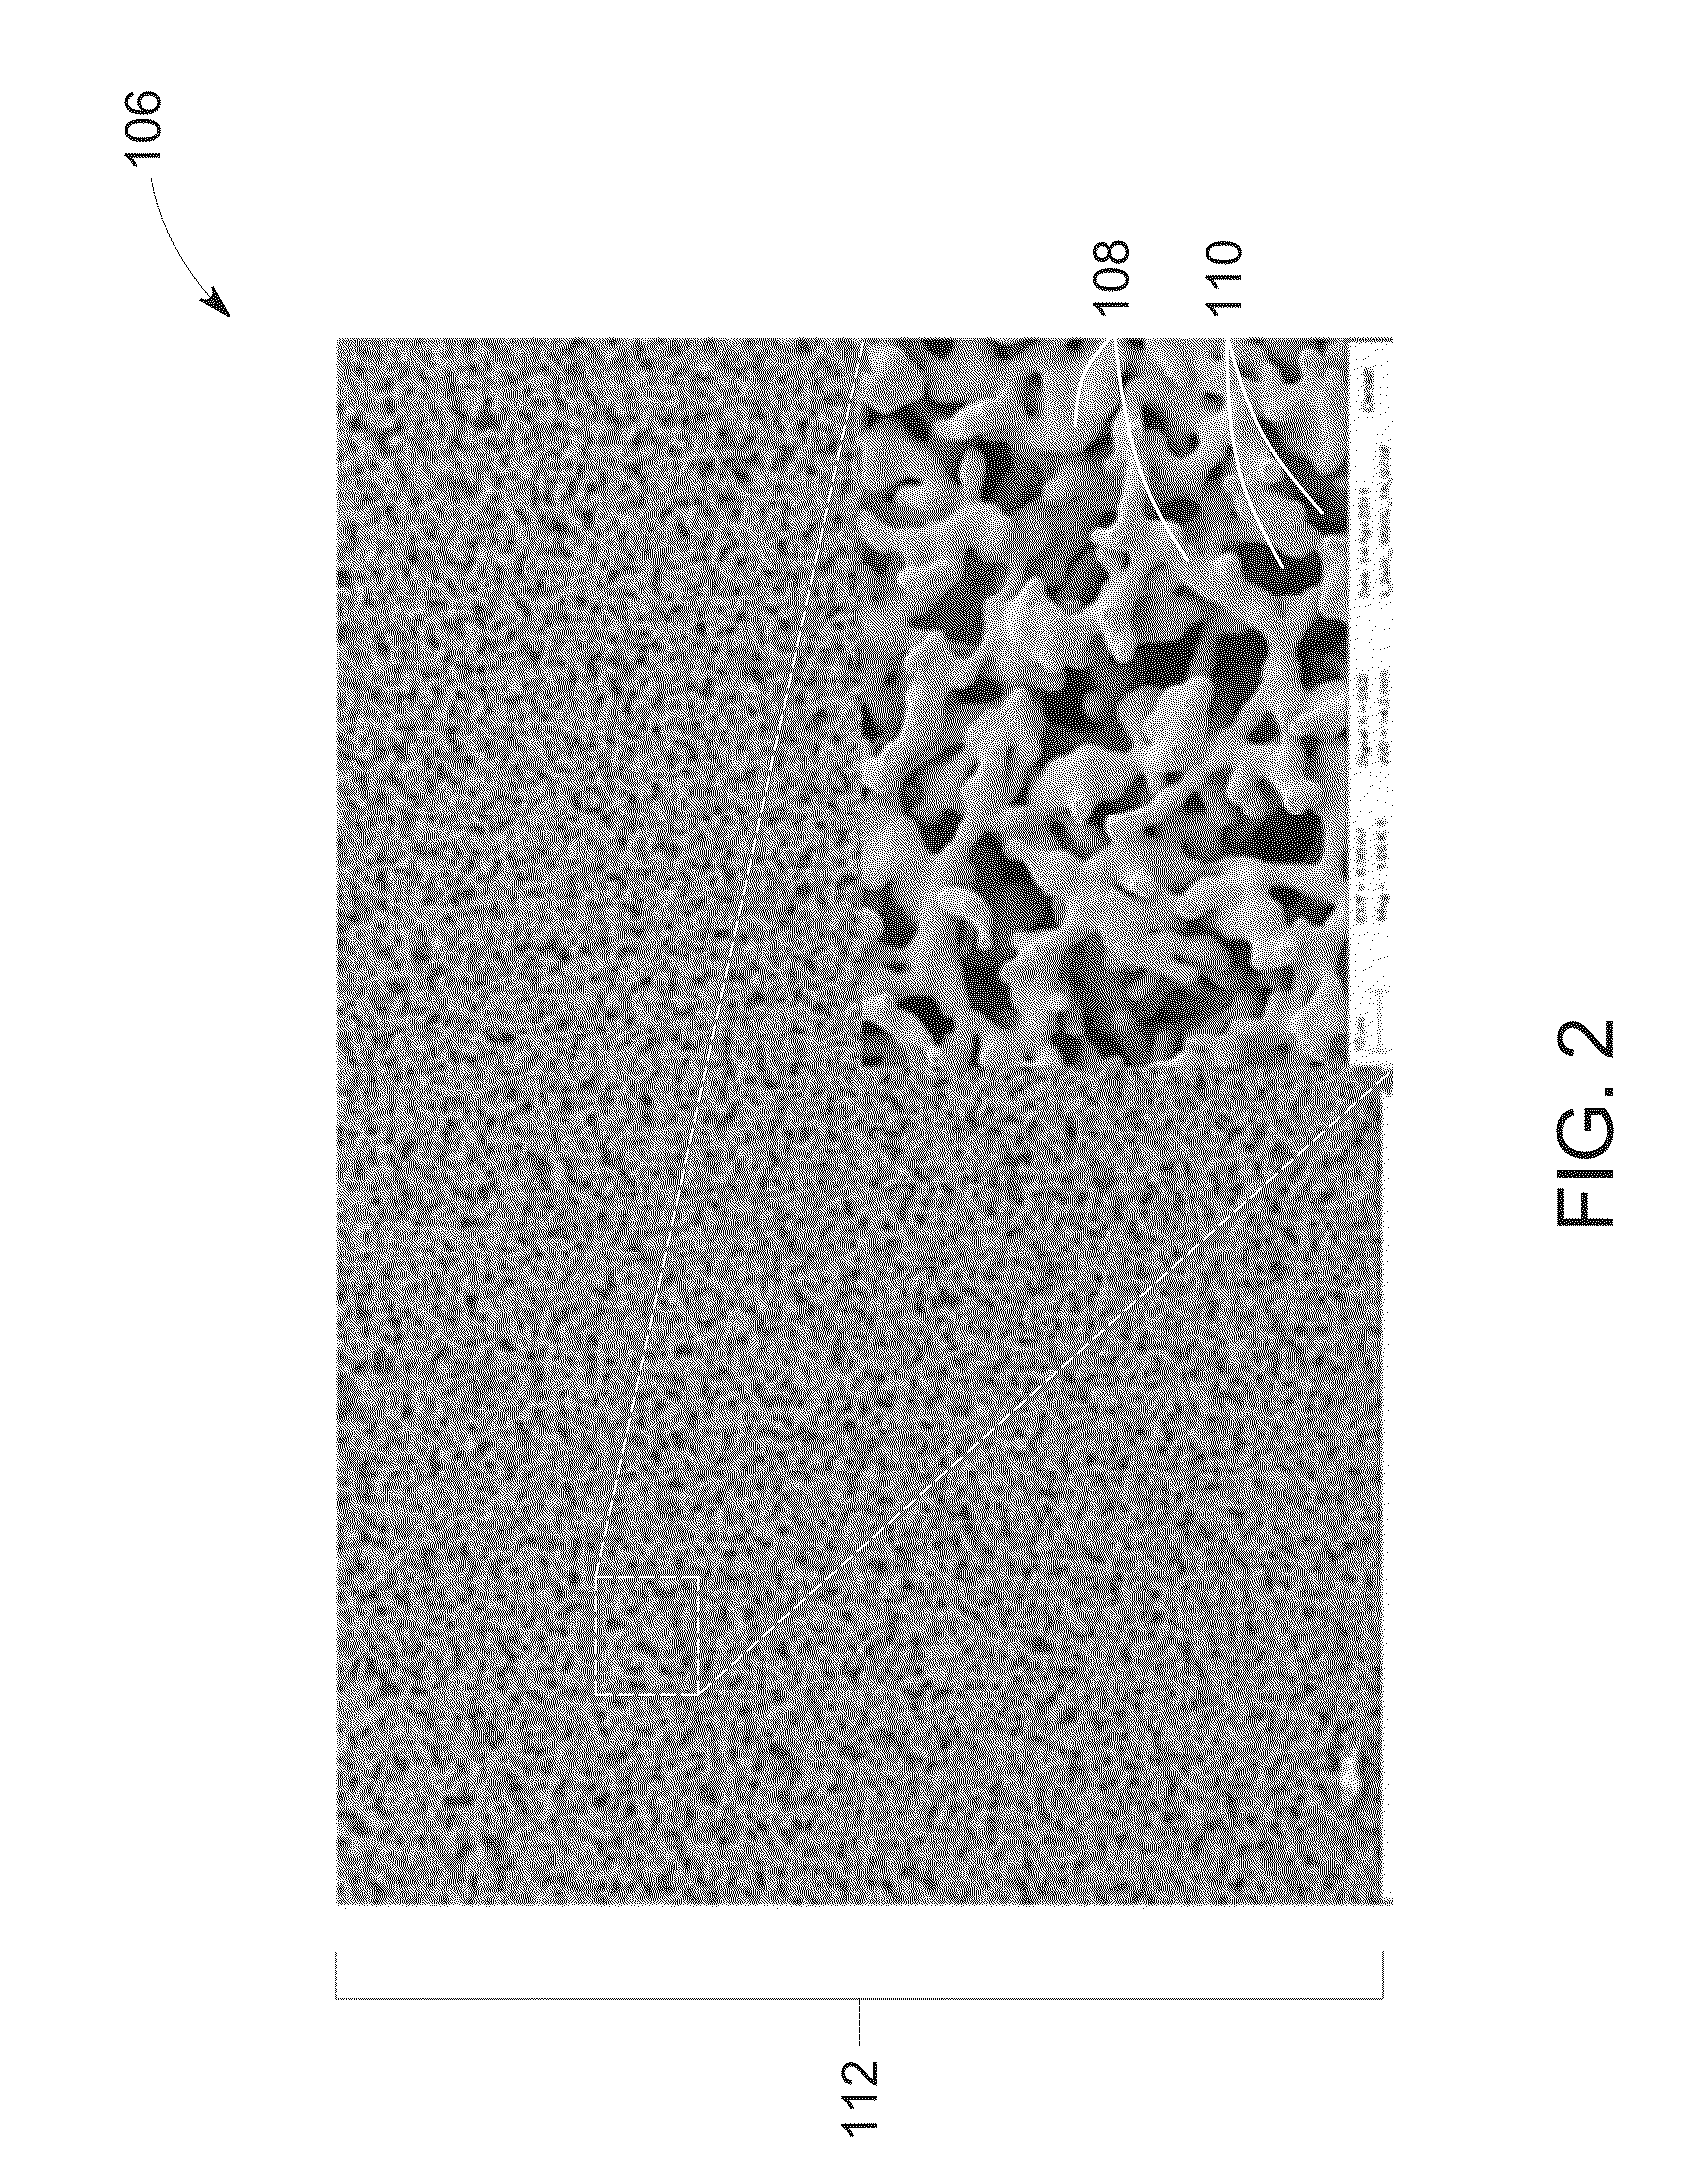 High specific area composite foam and an associated method of fabrication